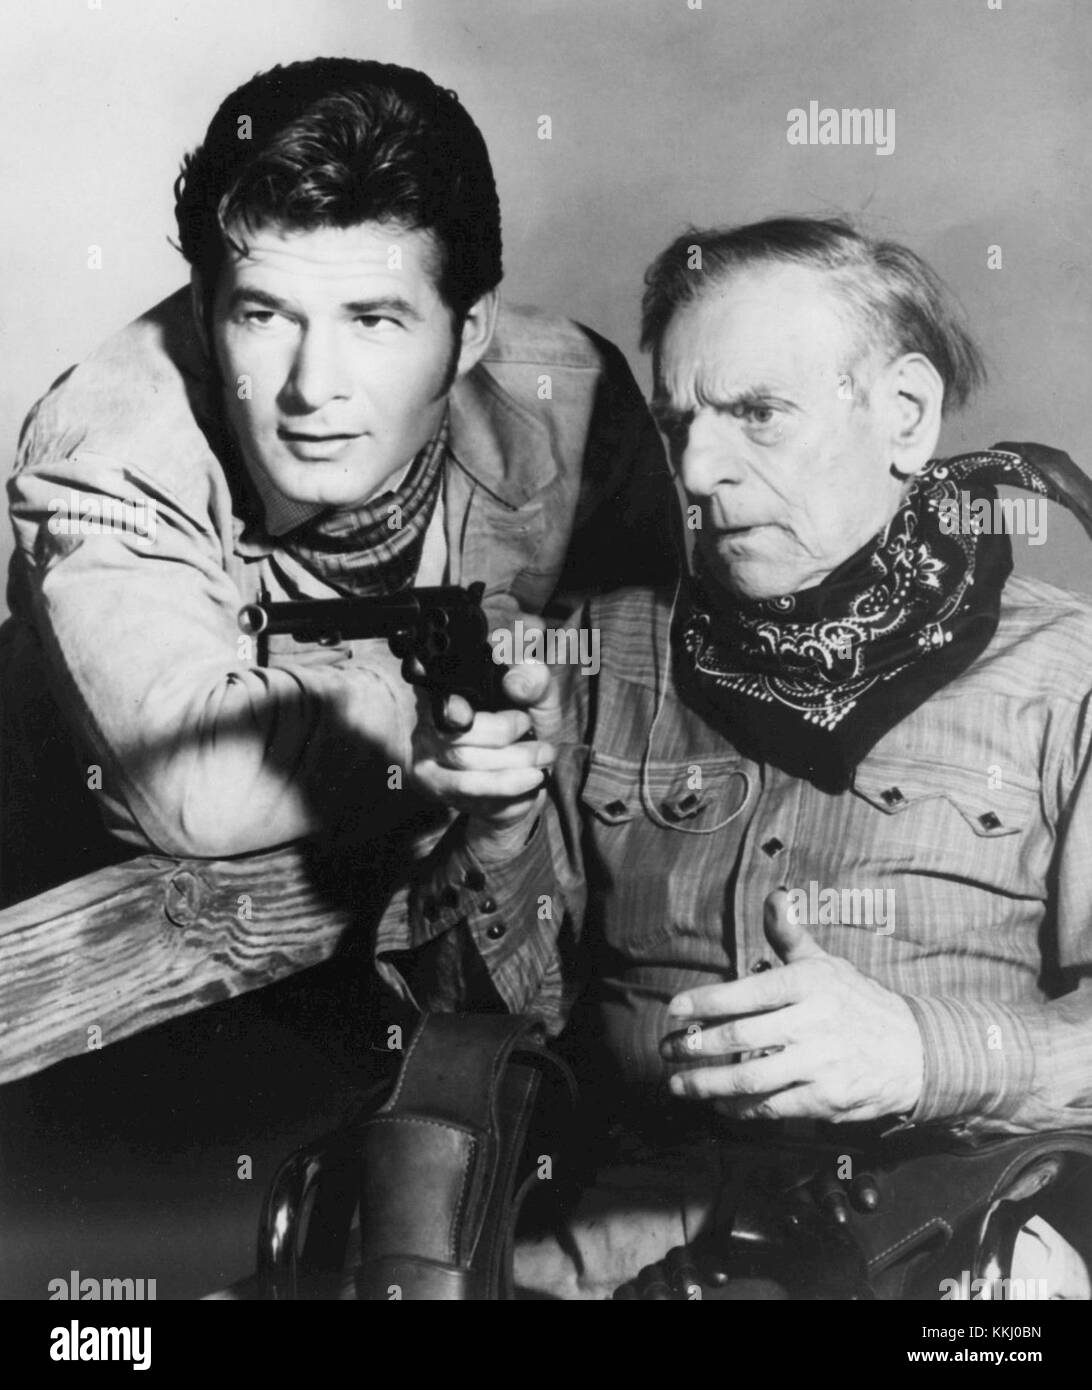 Bronco Billy Anderson and Gary Clarke 1963 Stock Photo